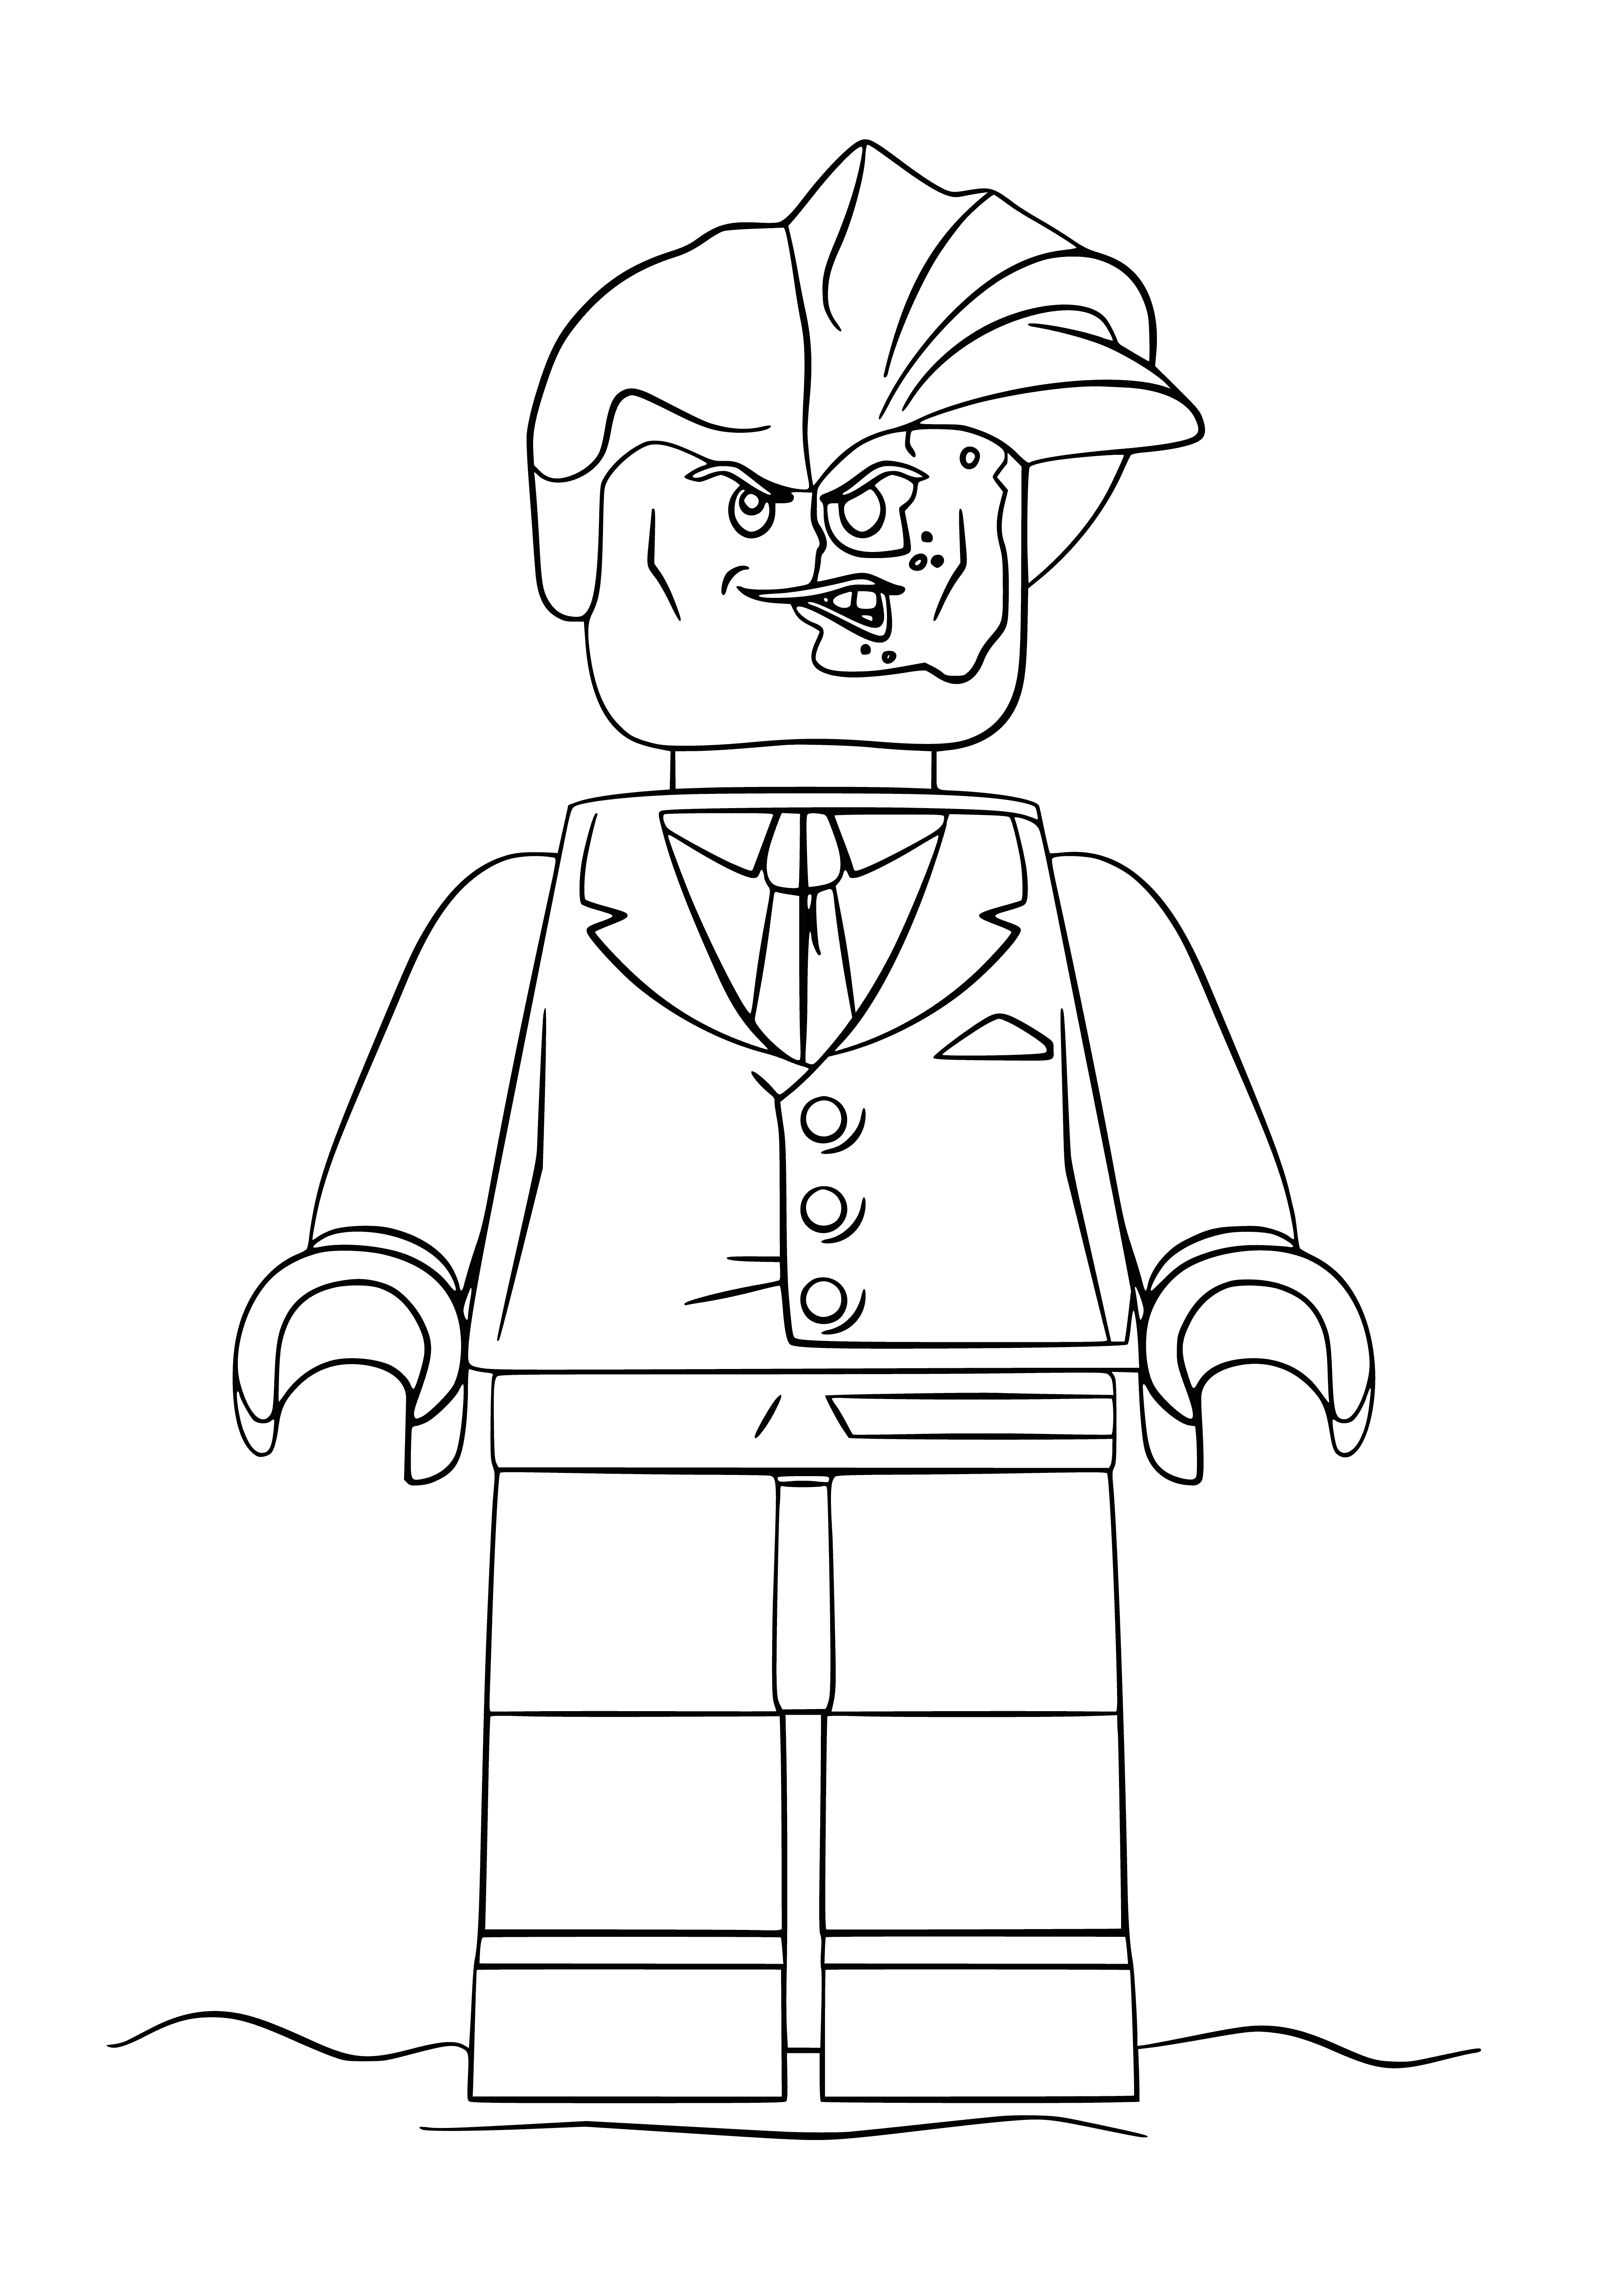 Two-faced coloring page